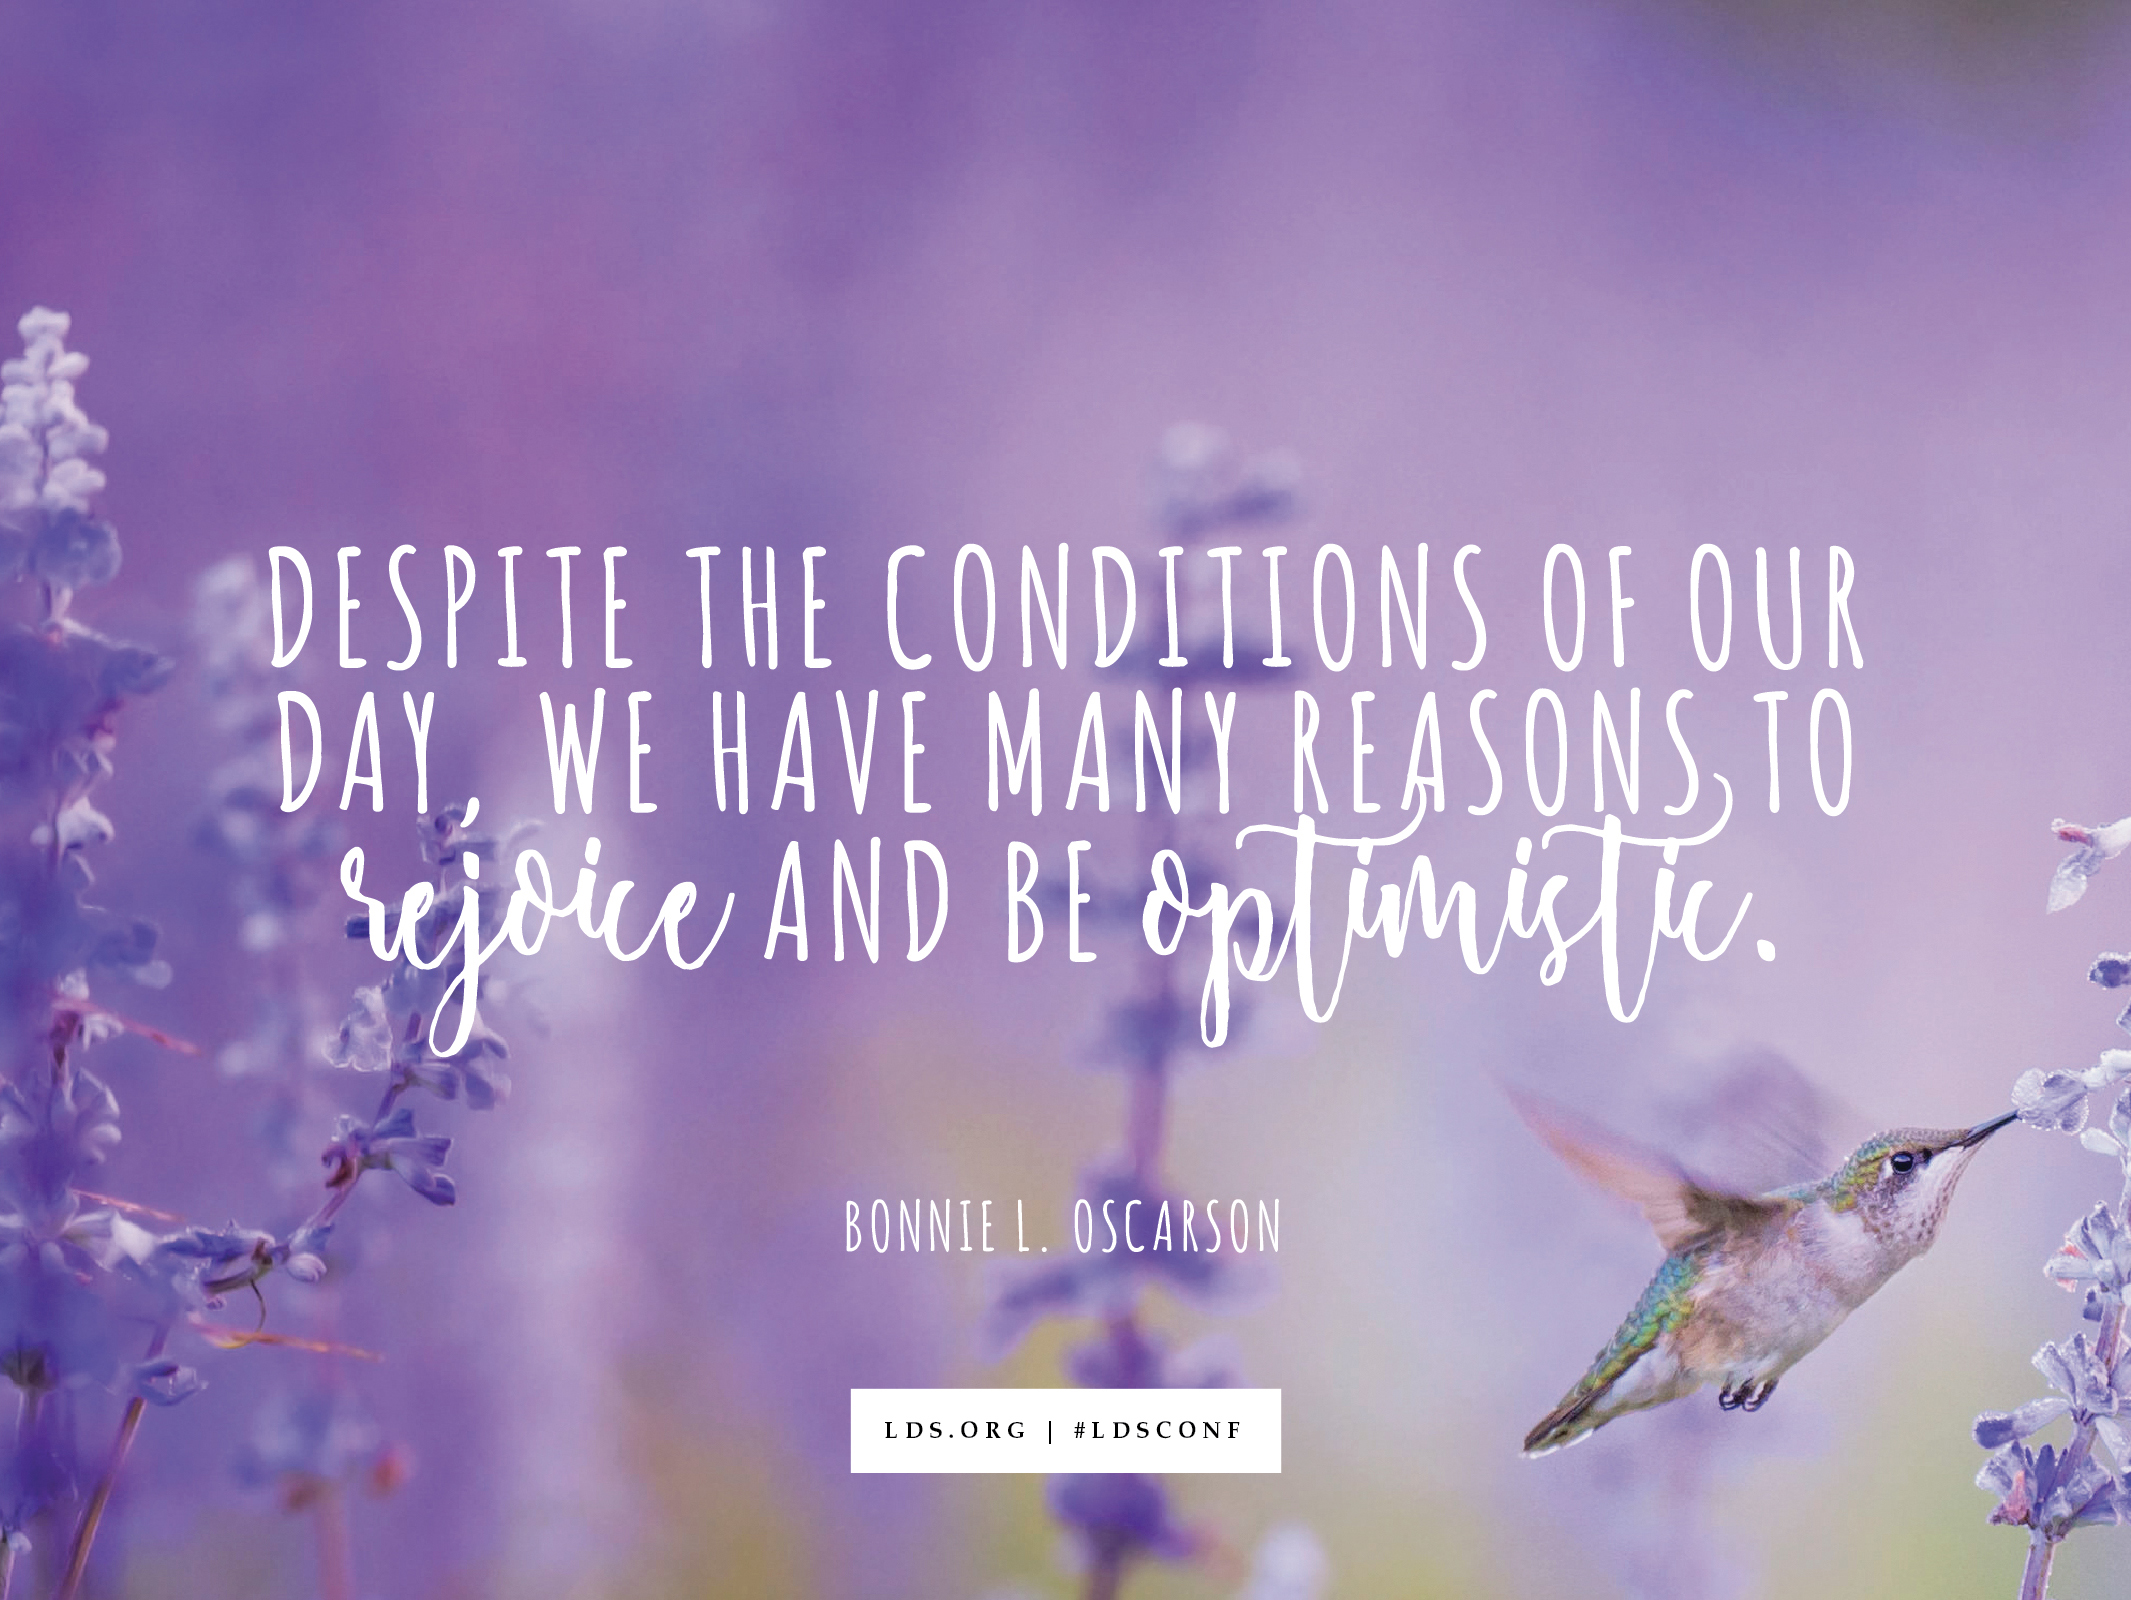 An image of a hummingbird feeding in a field of purple flowers, overlaid with a quote by Sister Bonnie L. Oscarson: “Despite the conditions of our day, we have many reasons to rejoice and be optimistic.”